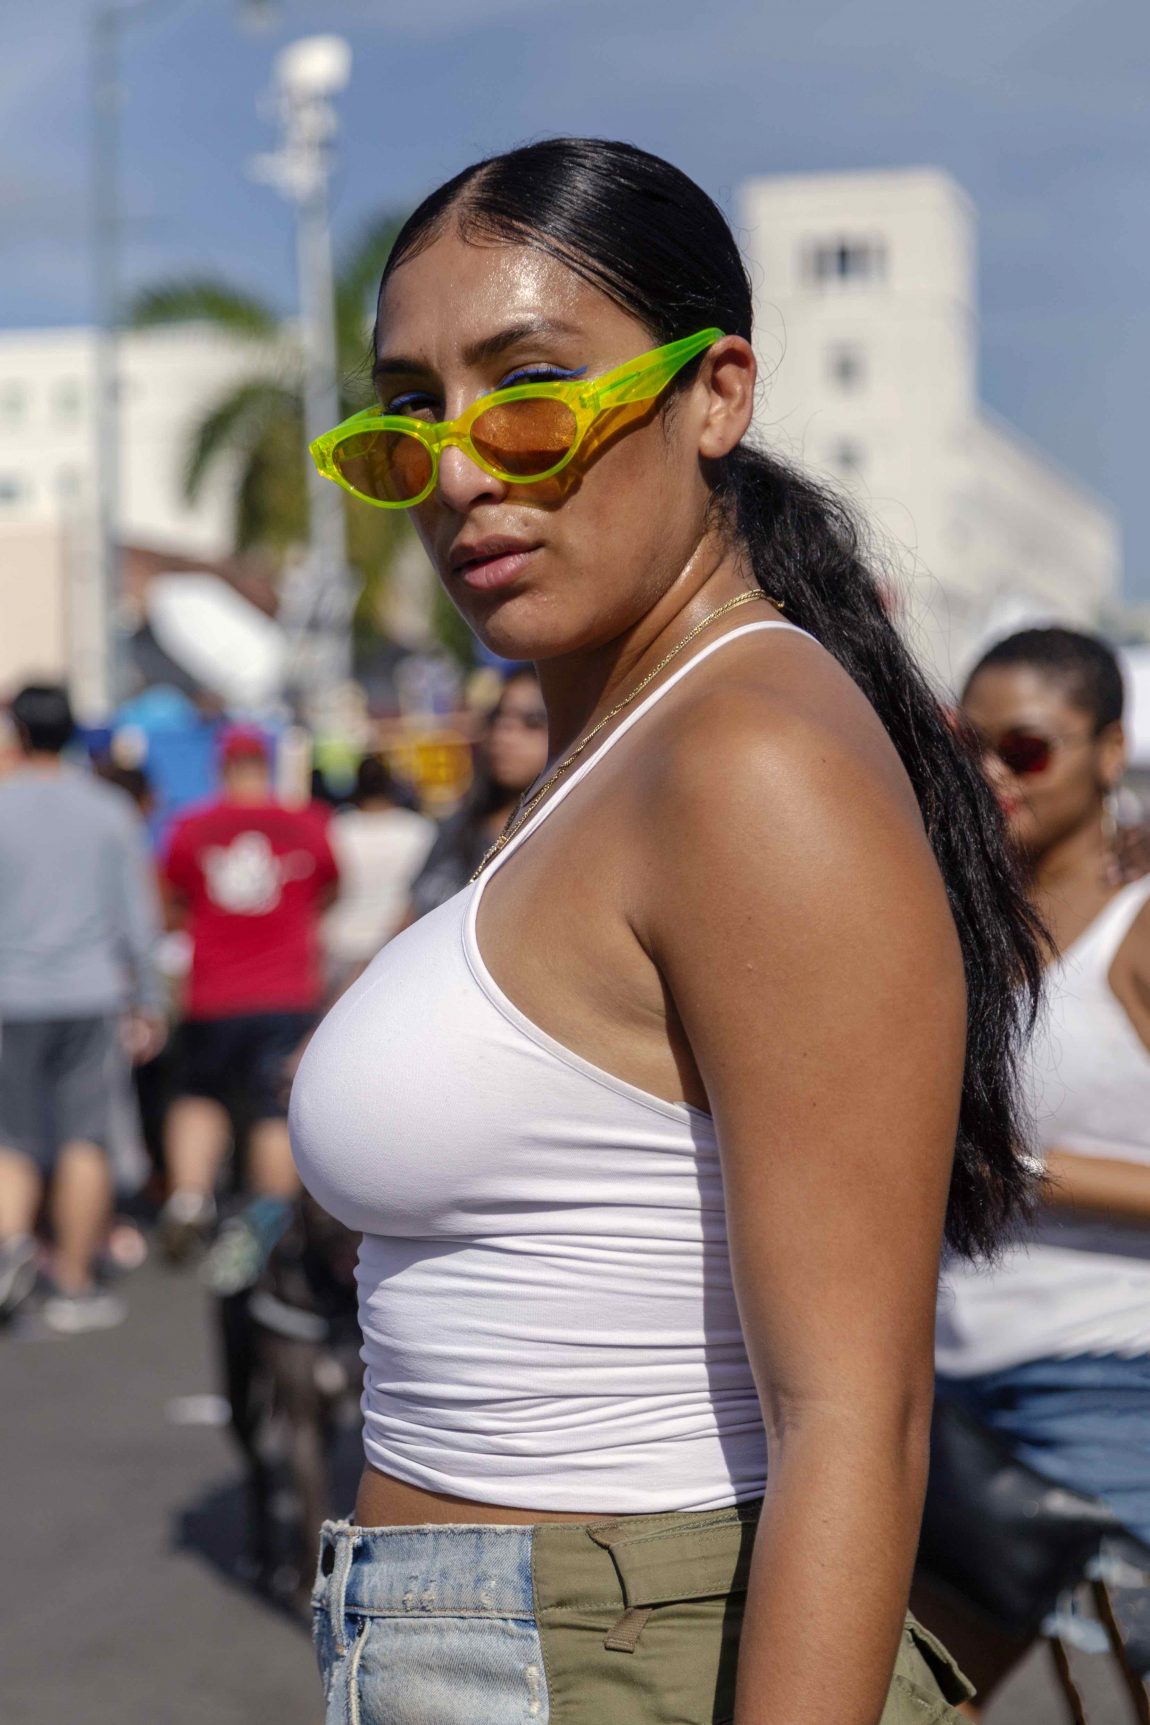 A Look Inside Calle Ocho, the US' Biggest Celebration of the Latinx